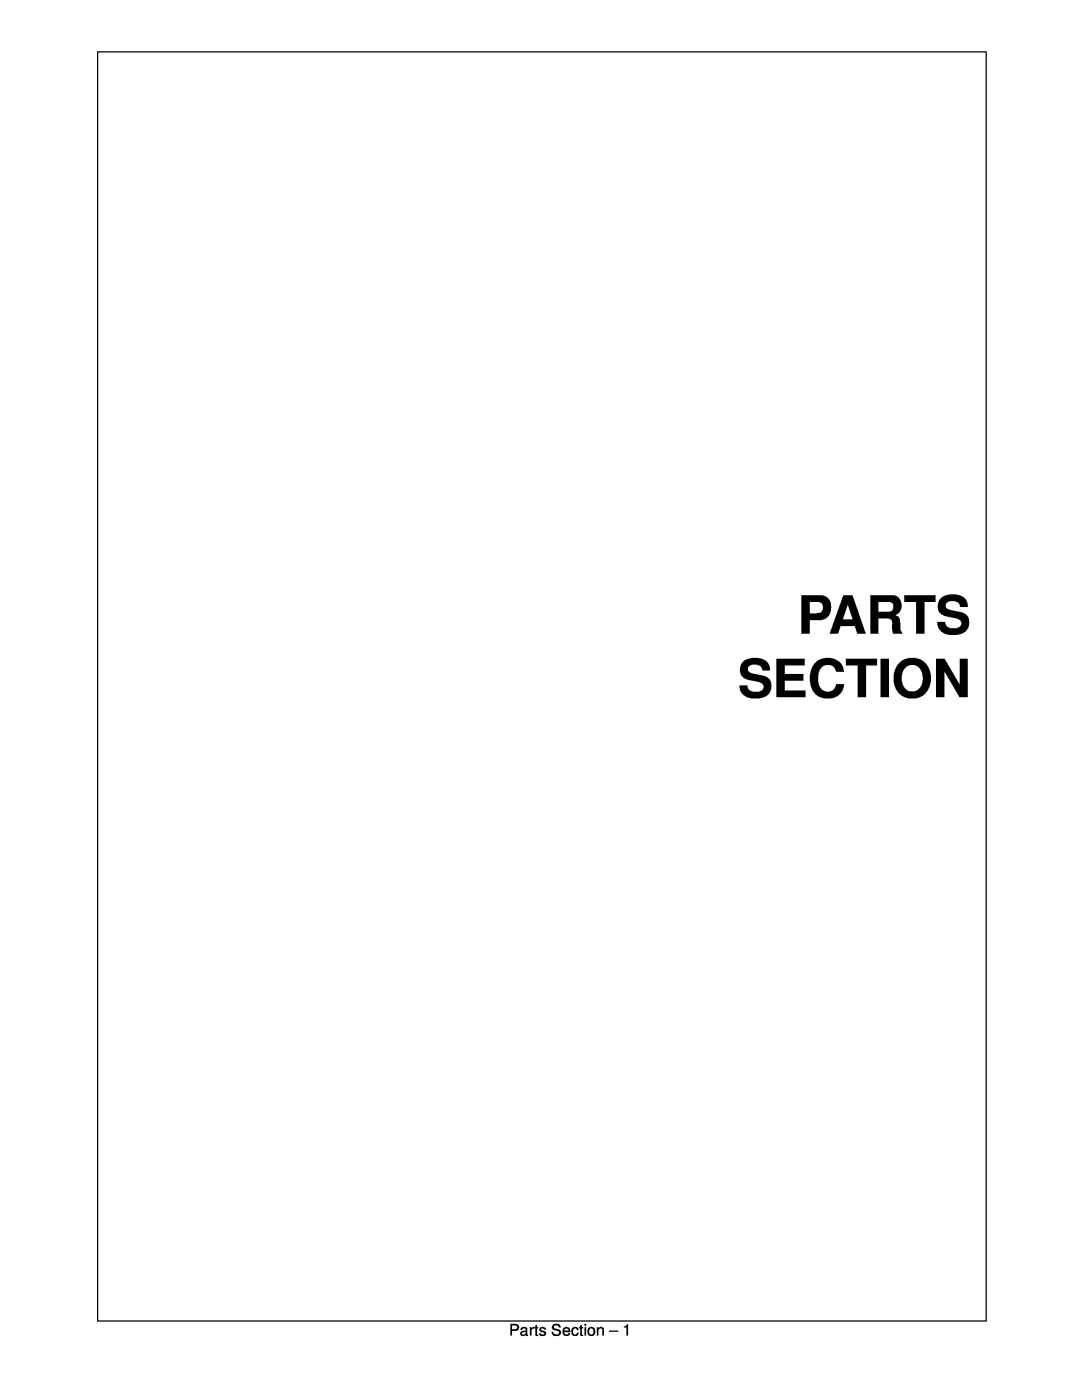 Servis-Rhino FS15 manual Parts Section 